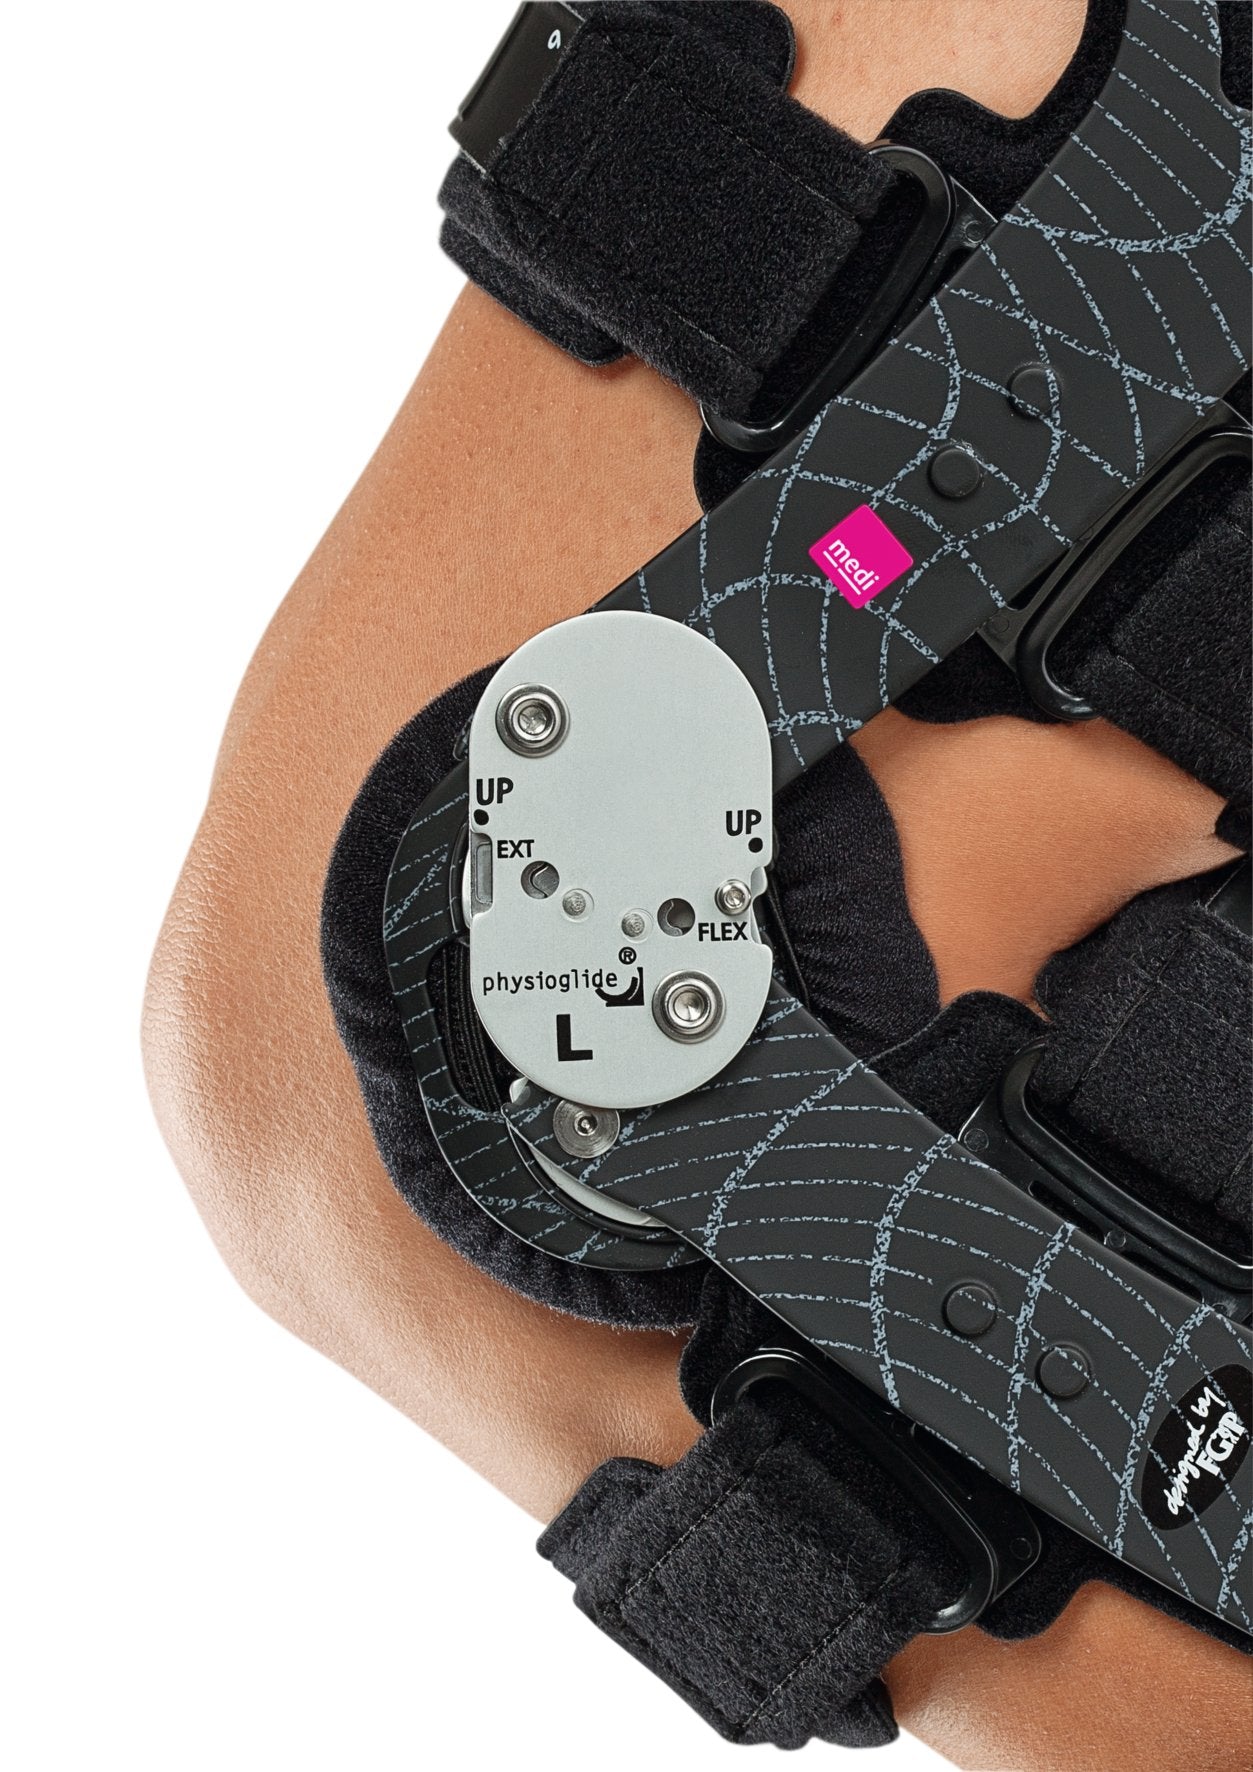 Thermoskin Hinged Knee Wrap Flexion/Extension – Doc Ortho